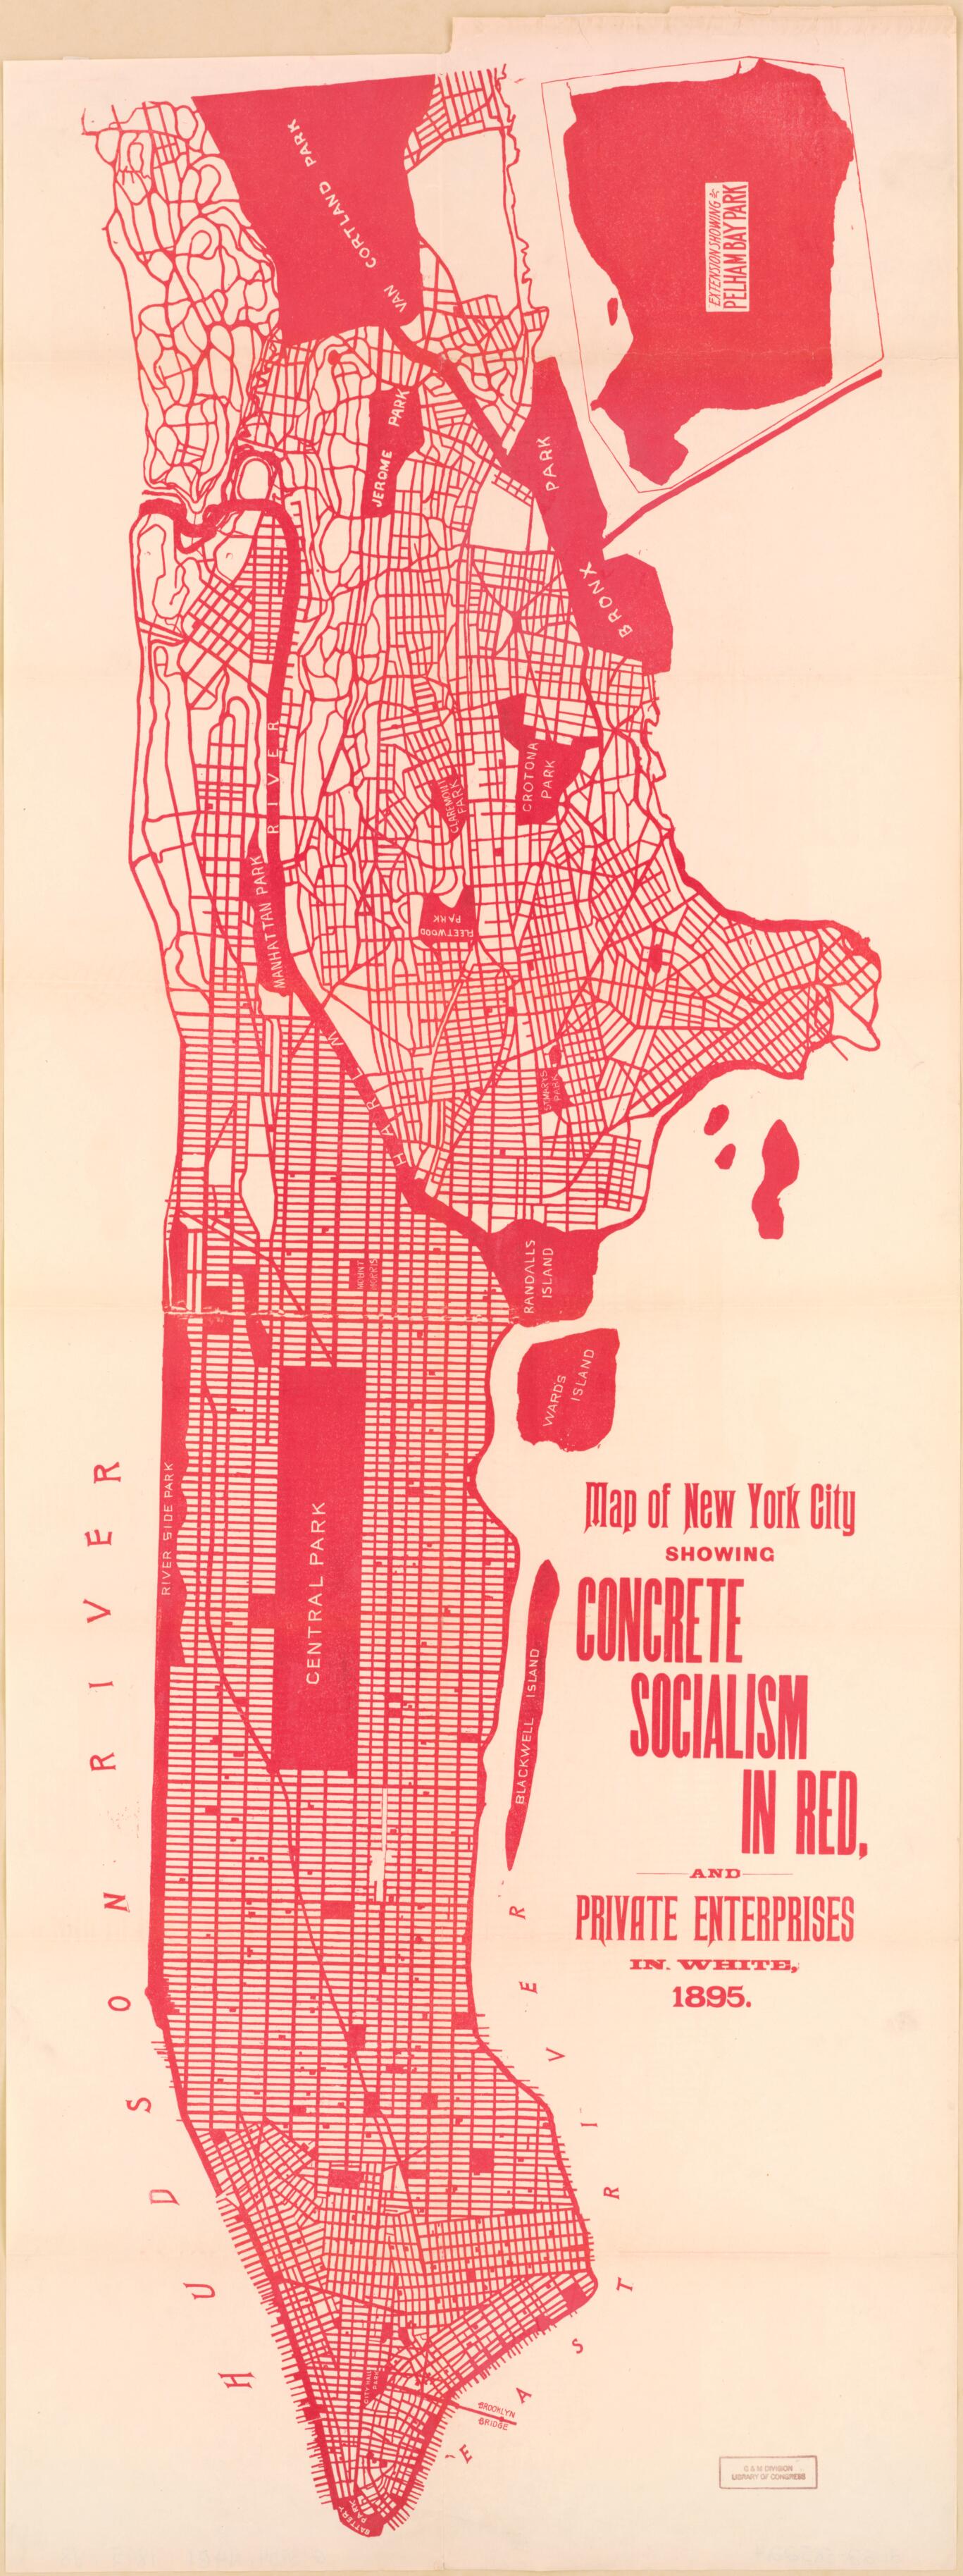 This old map of Map of New York City Showing Concrete Socialism In Red, and Private Enterprises In White, from 1895 was created by Walter Vrooman in 1895